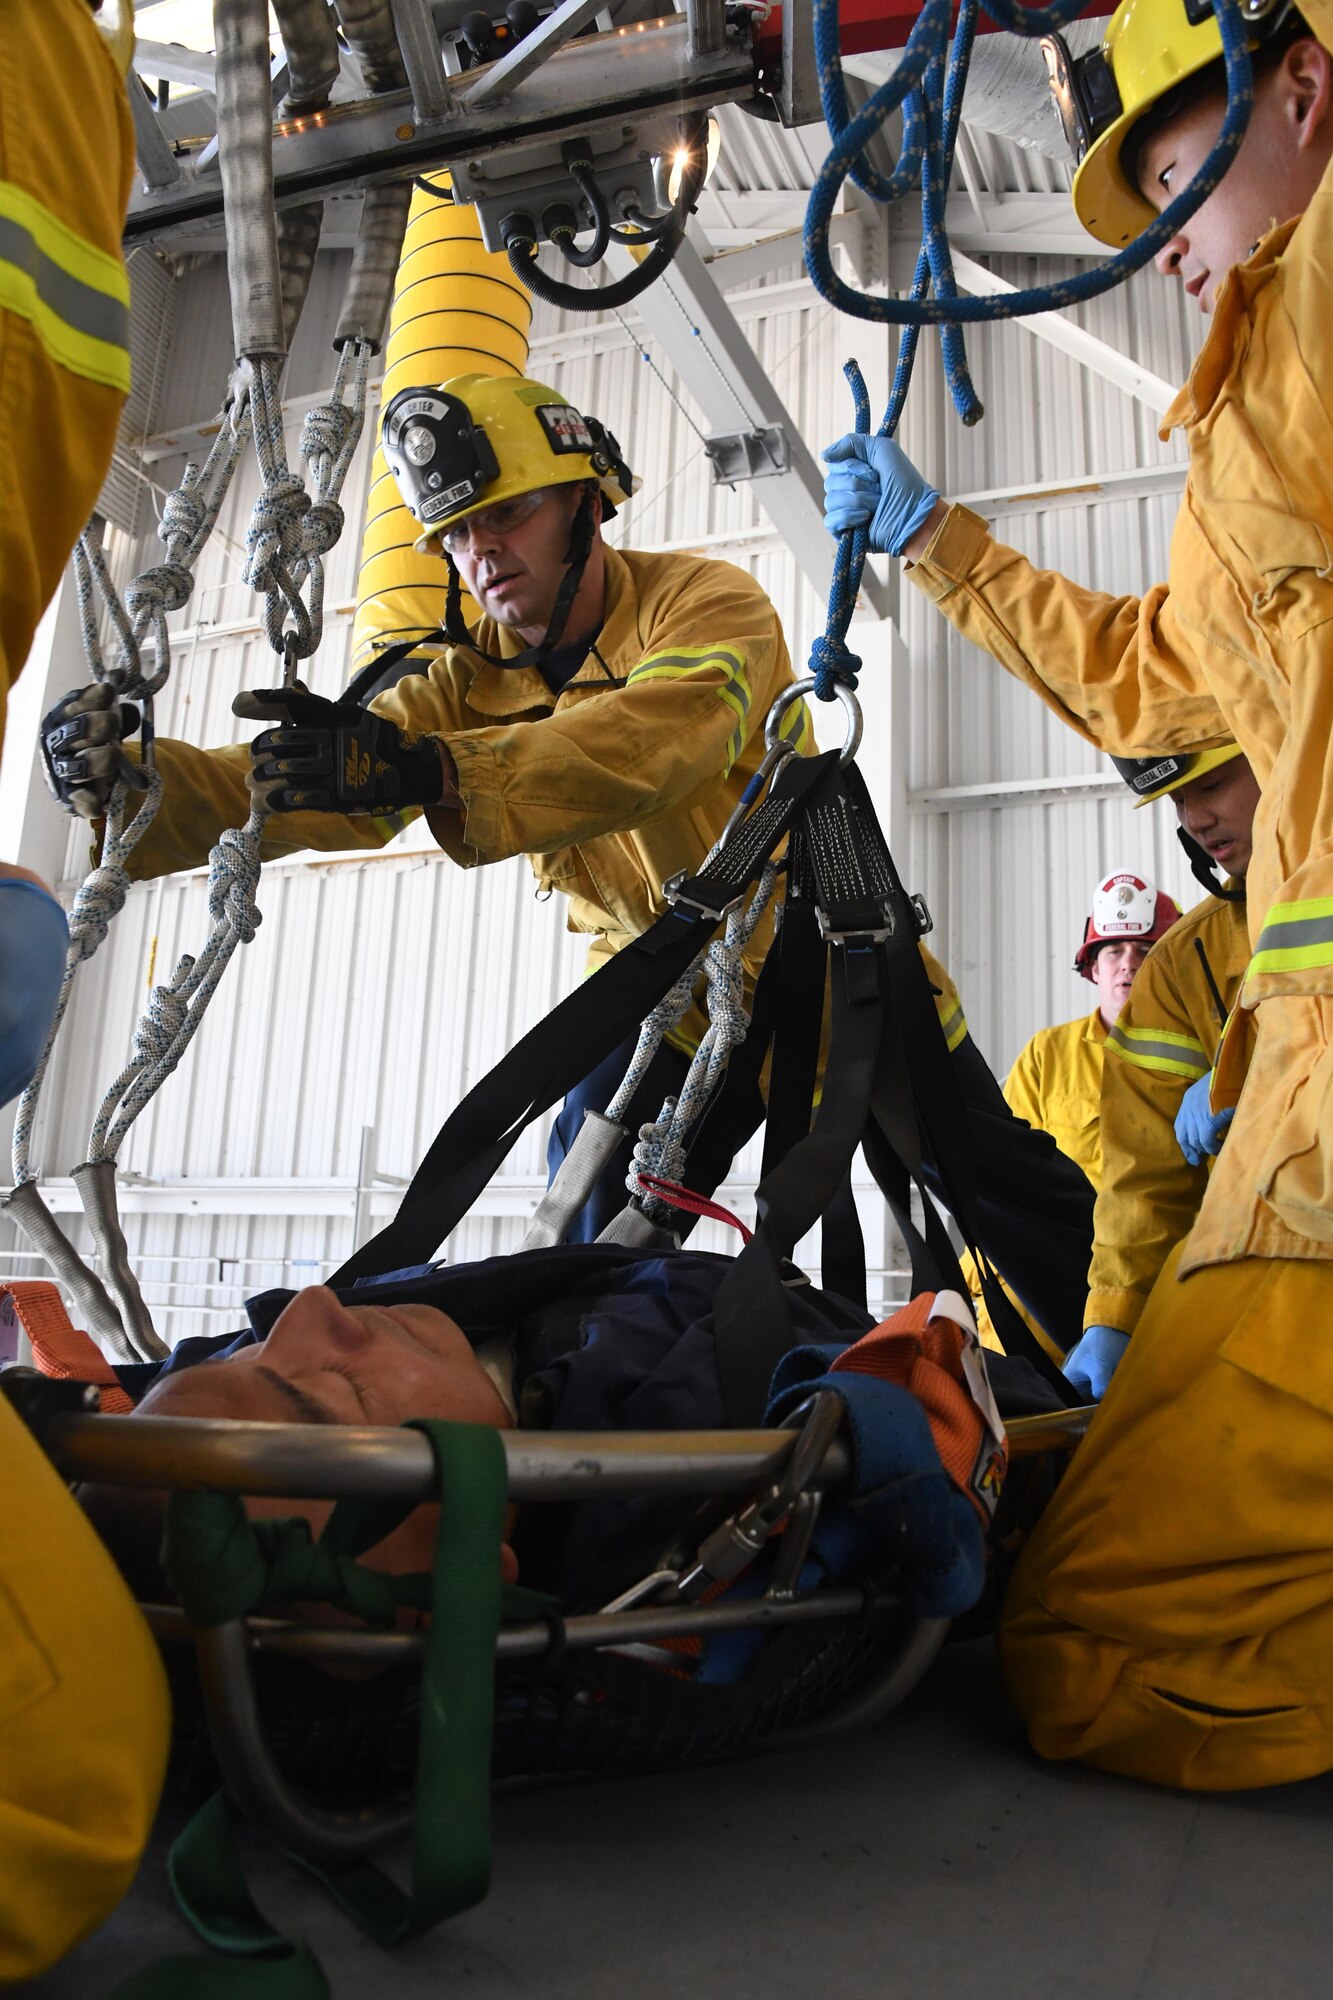 Federal Fire Ventura County Firefighter Michael Barnett and Firefighter David Yi prepare a transport litter stretcher to lower Senior Airman Pedro Pescador with the 146th Airlift Wing’s Aircraft Fuel Systems Maintenance Squadron off the wing of a C-130J aircraft during a “confined space rescue exercise” at the Channel Islands Air National Guard Station Port Hueneme, Calif. April 1, 2017. During a confined space rescue exercise, first-responders with the 146th Airlift Wing’s Aircraft Fuel Systems Maintenance Squadron and Federal Fire Ventura County firefighters run through the critical emergency operations that would take place if a fuel-cell maintenance worker were to become incapacitated while working inside the very small fuel tanks inside the aircraft’s wings. (U.S. Air National Guard photo by: Staff Sgt. Nieko Carzis.)